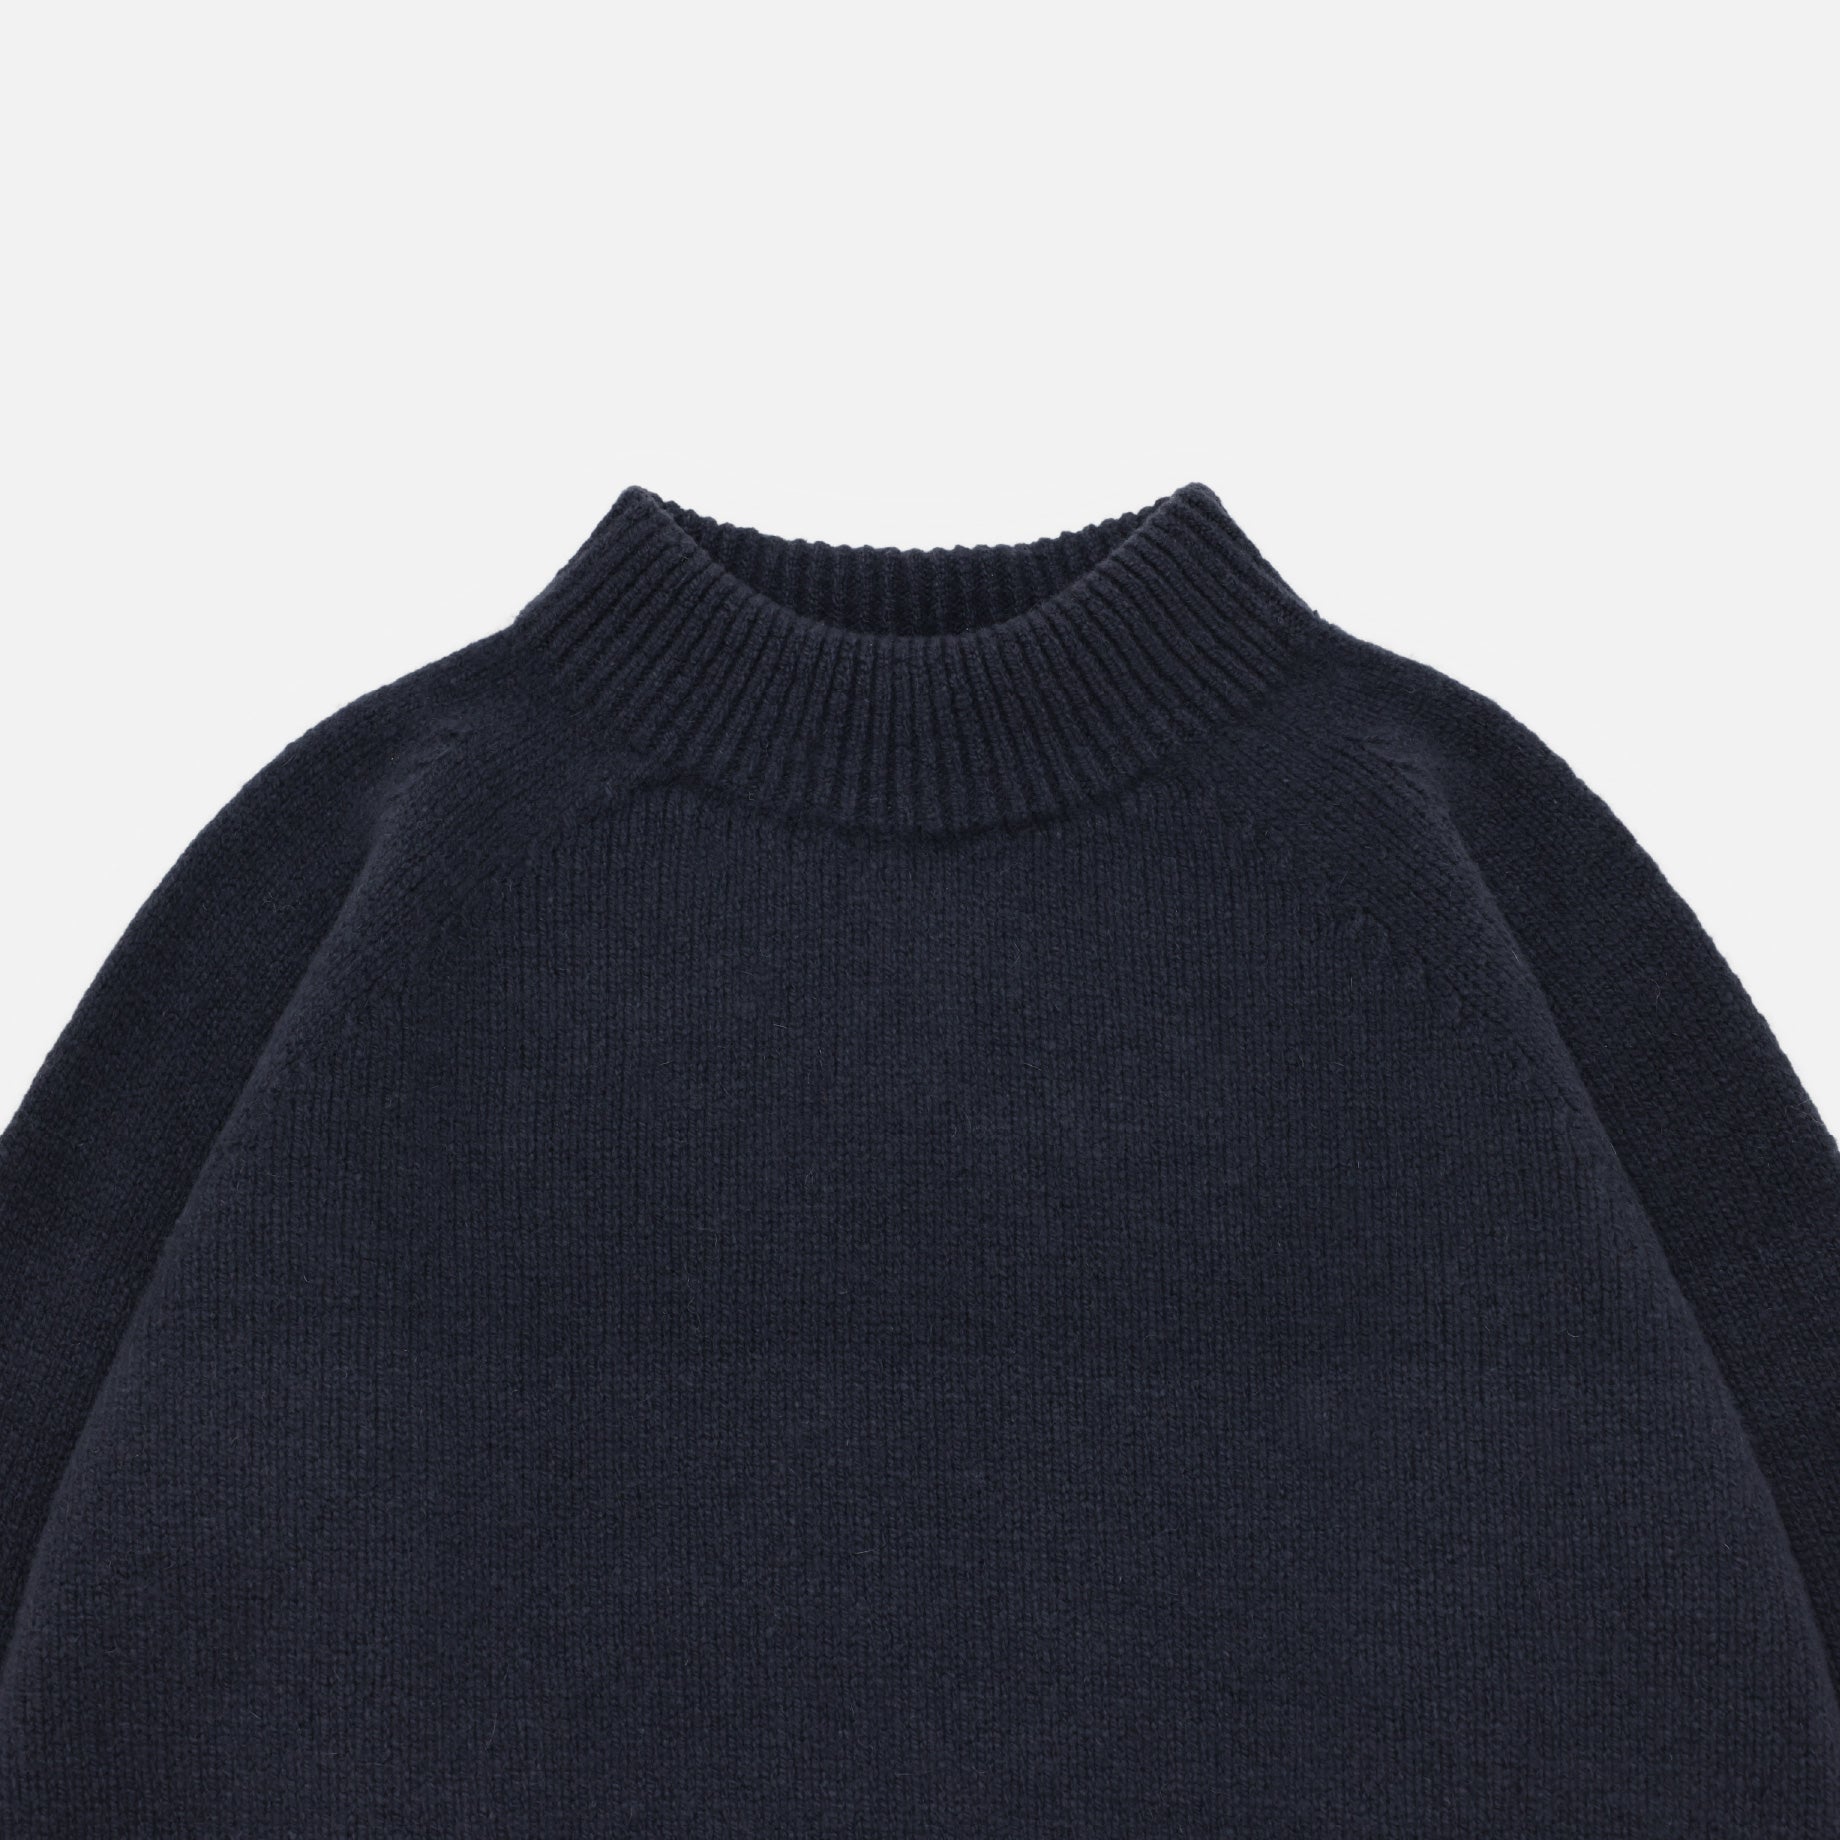 W/G MOC NECK L/S (CHACOAL)